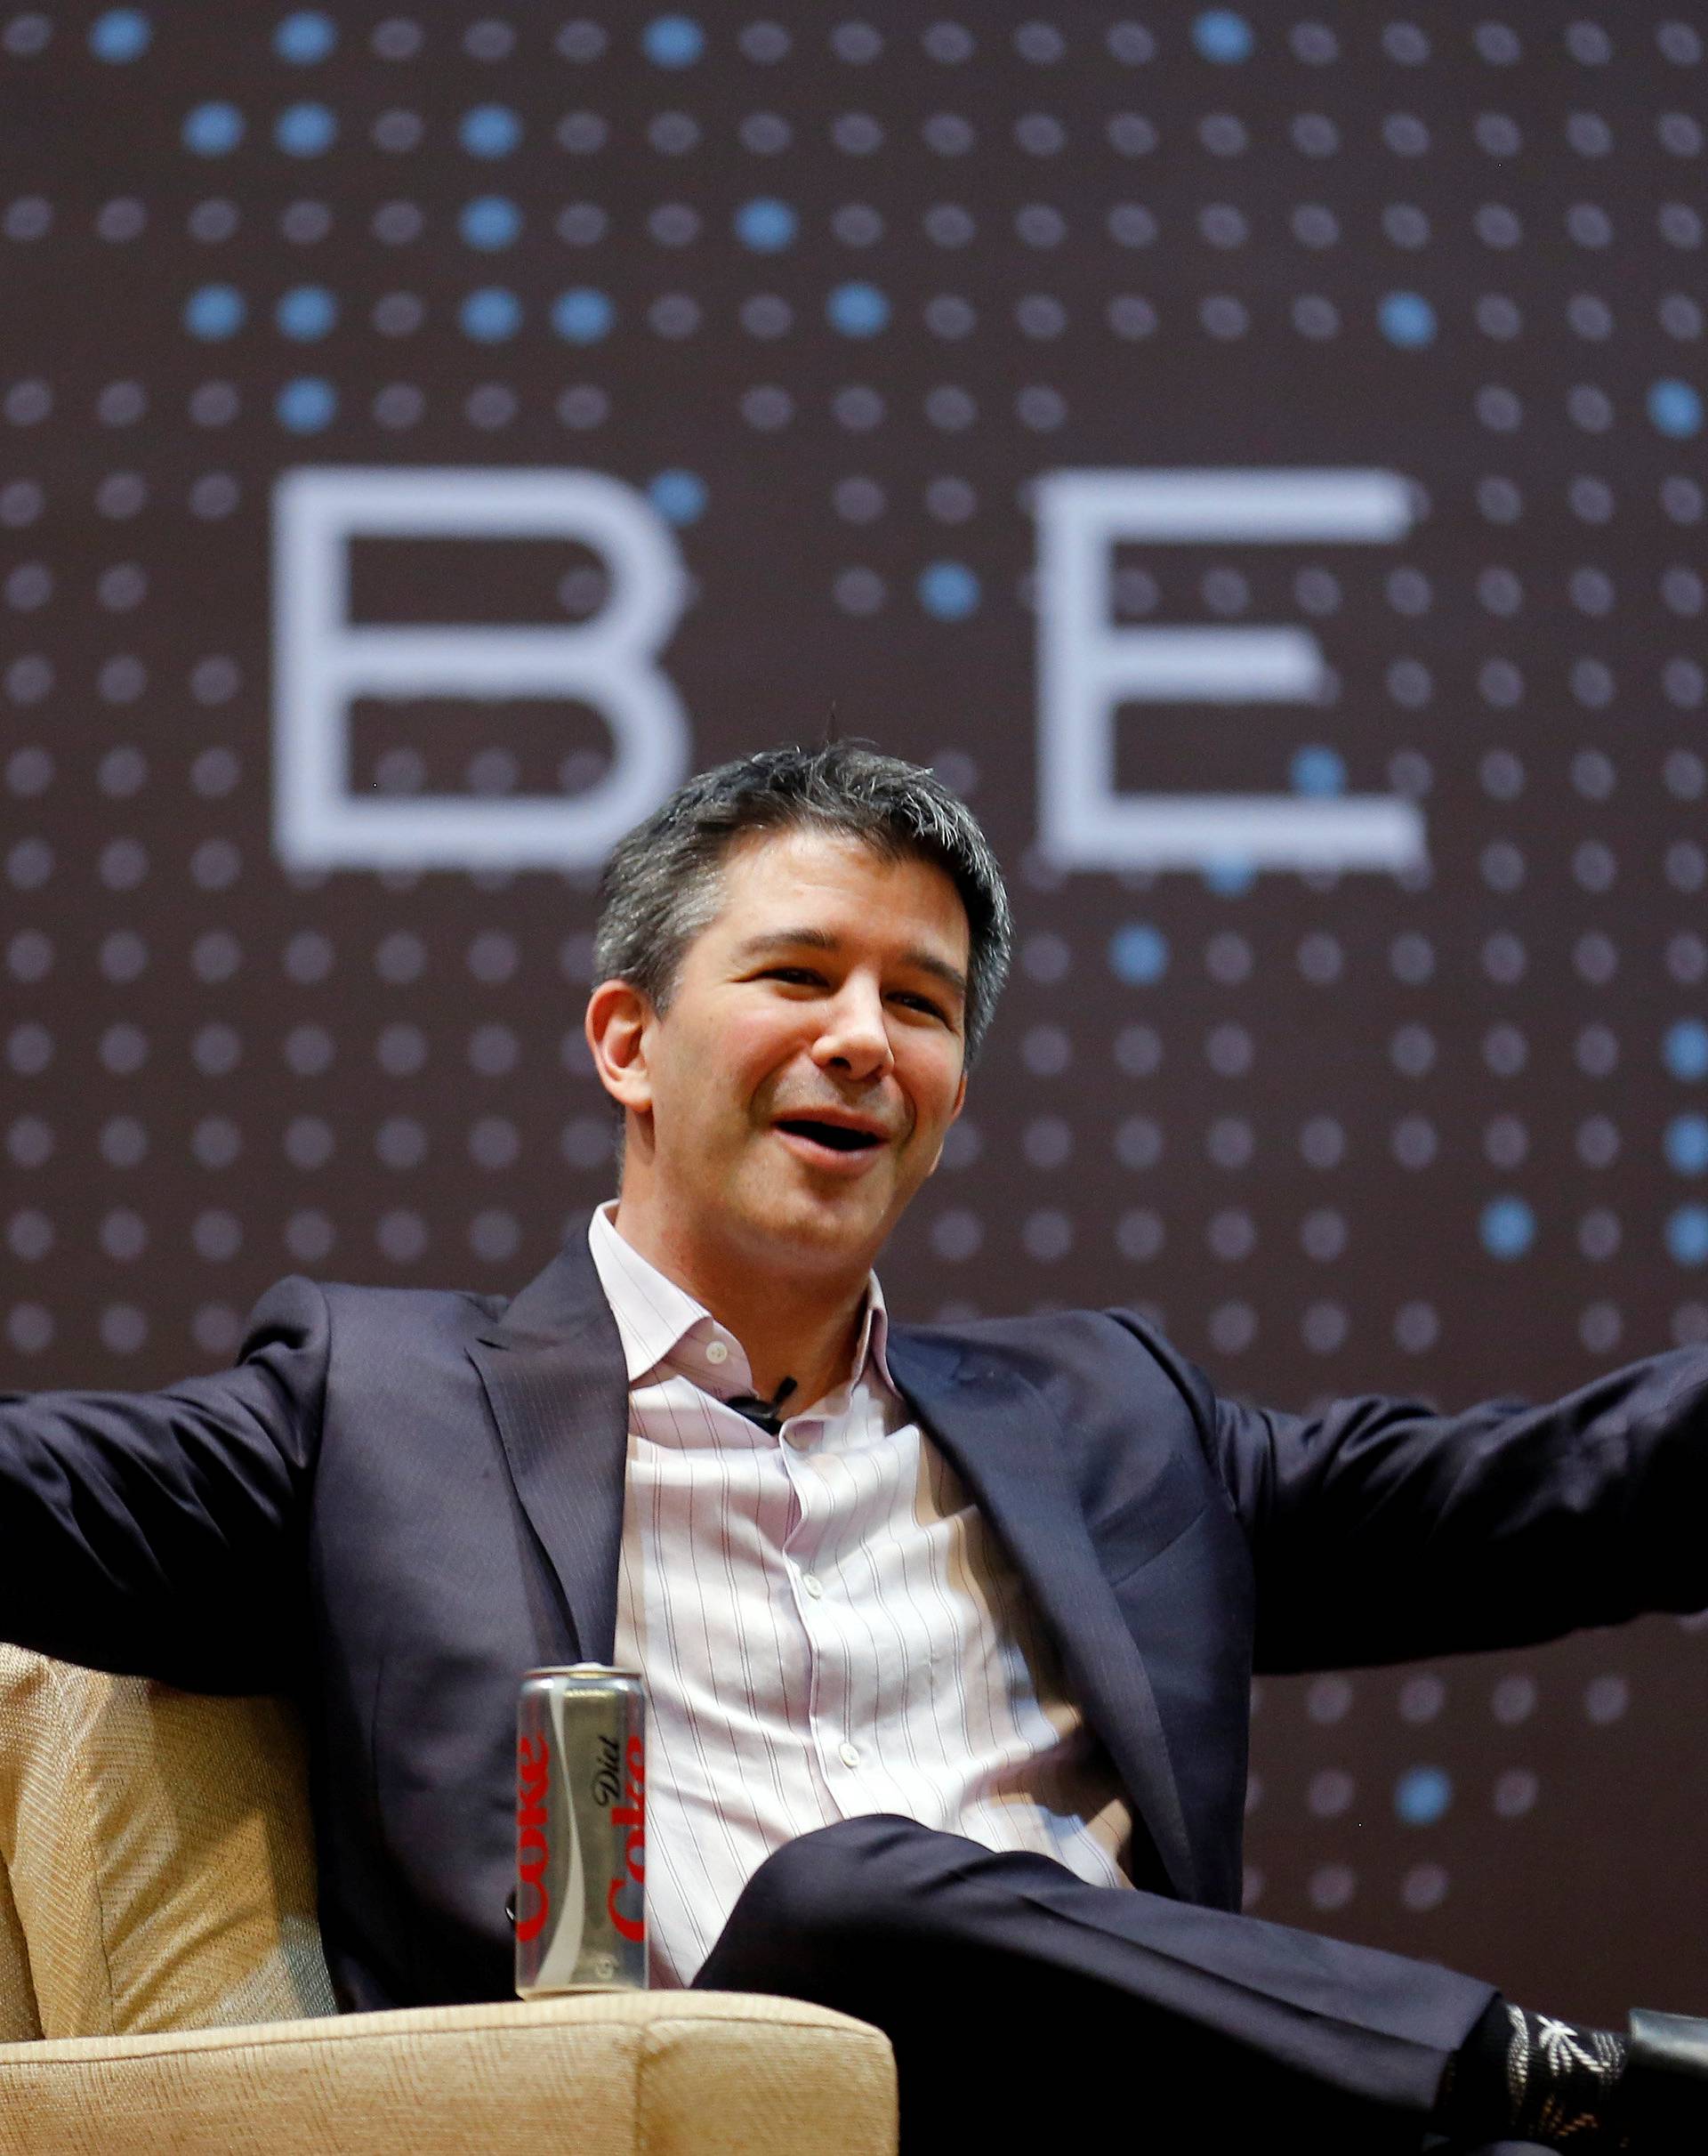 FILE PHOTO - Uber CEO Kalanick speaks to students during an interaction at IIT campus in Mumbai